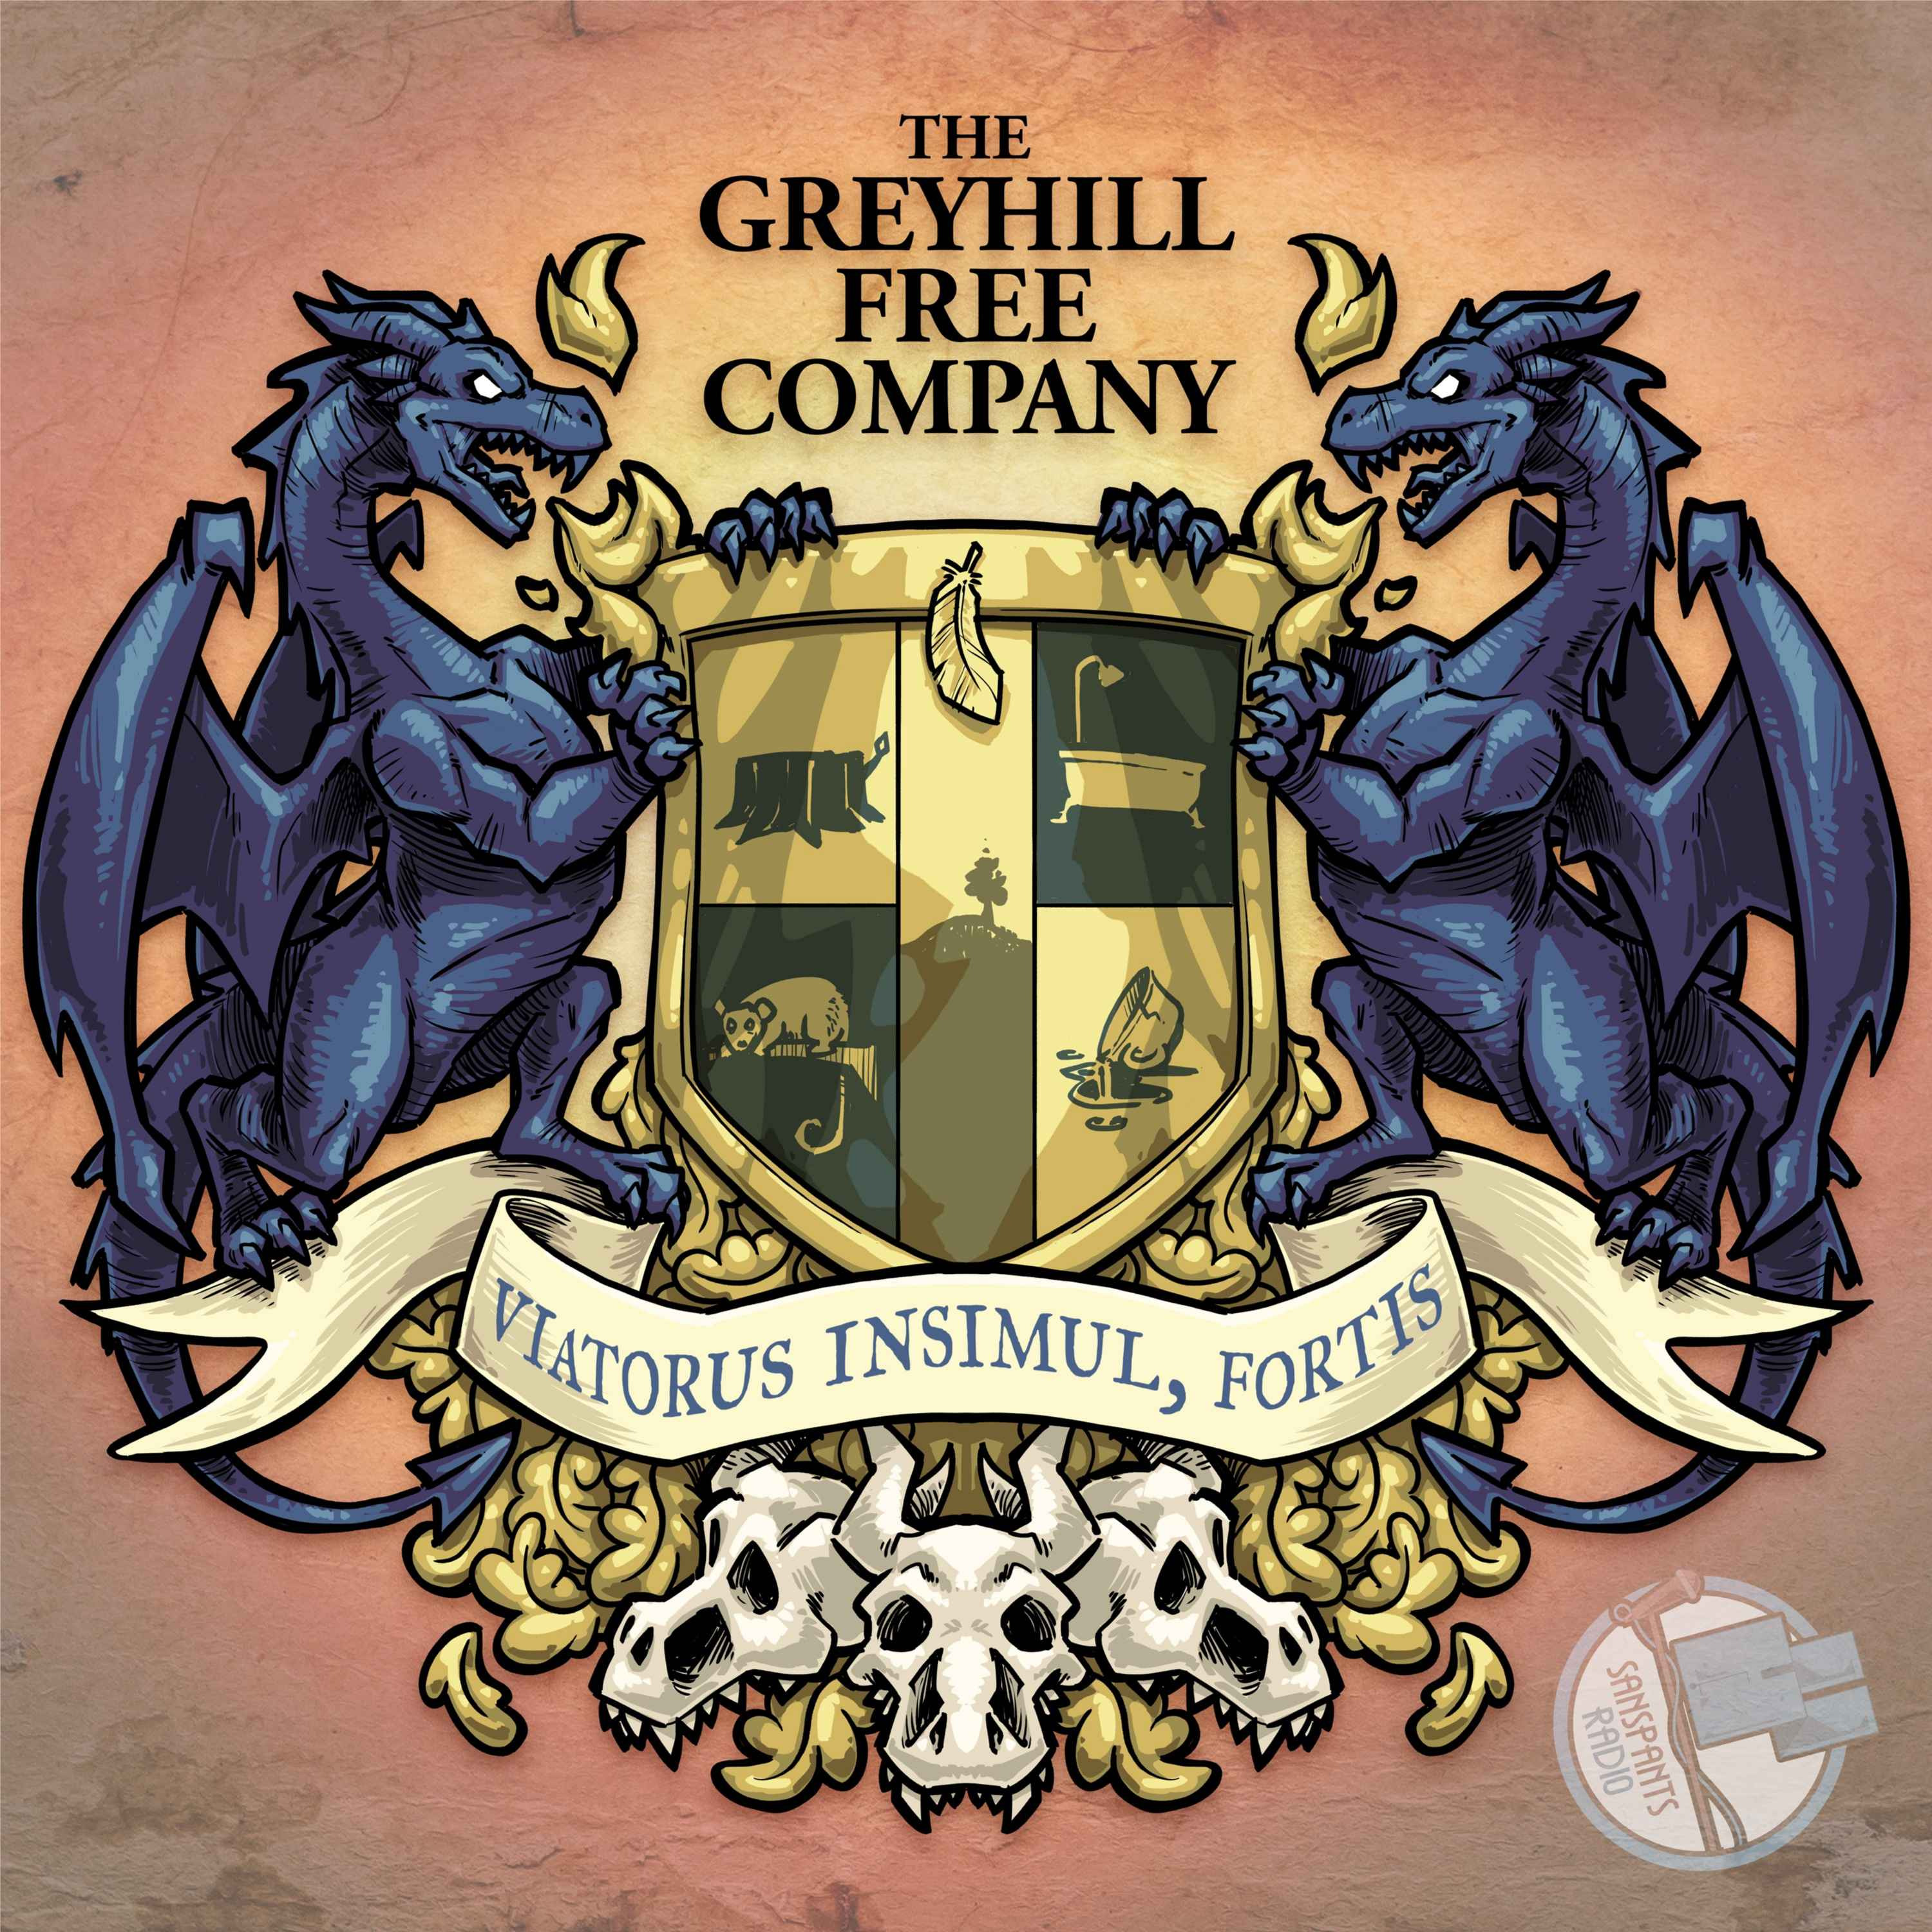 Stories of The Greyhill Free Company II #13 The Tragic Tale of James and Weebor